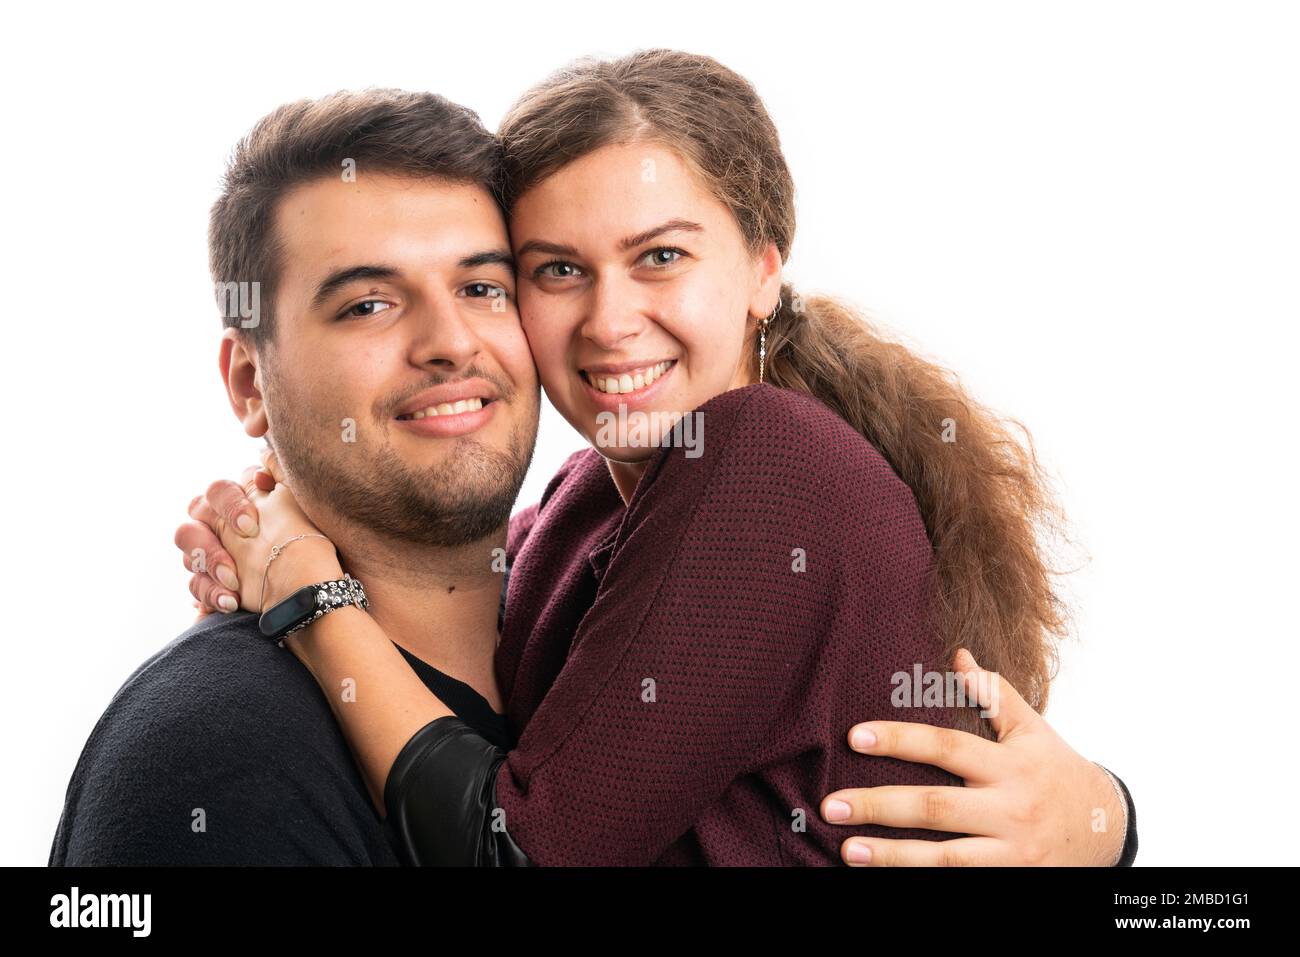 Cheerful adult man and woman couple close-up boyfriend girlfriend portrait hugging as romantic concept isolated on white studio background Stock Photo